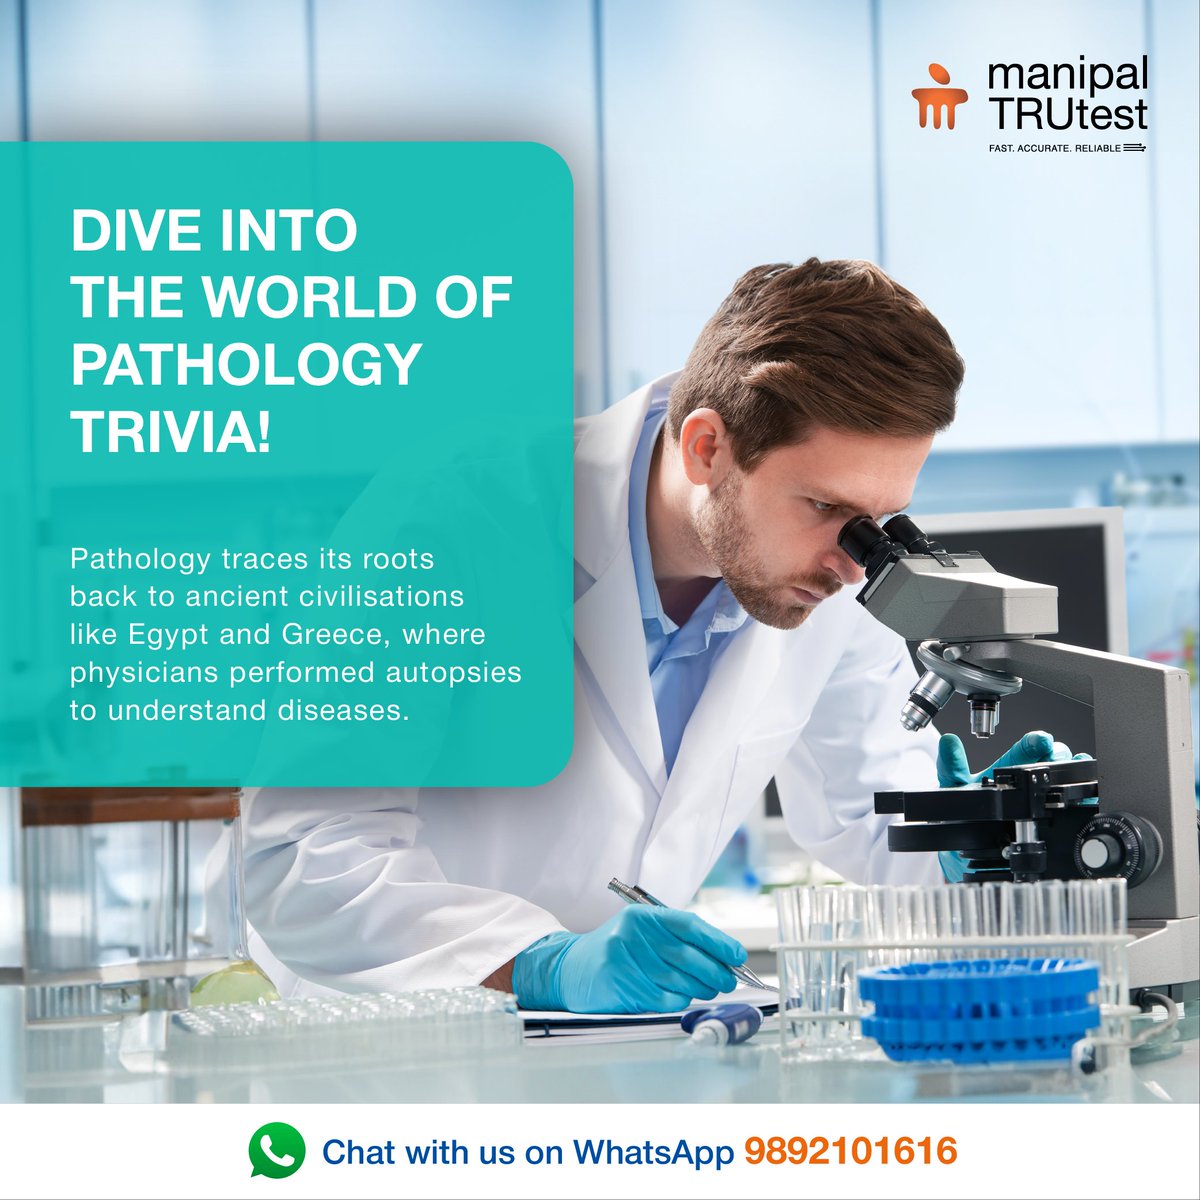 Did you know that pathology isn't just about studying diseases? It's also about discovering the mysteries of the human body's inner workings. 

Explore our services! Click: shorturl.at/enL03

#pathology #pathologytests #bloodtest #basichealthcheckpackage #ManipalTrutest